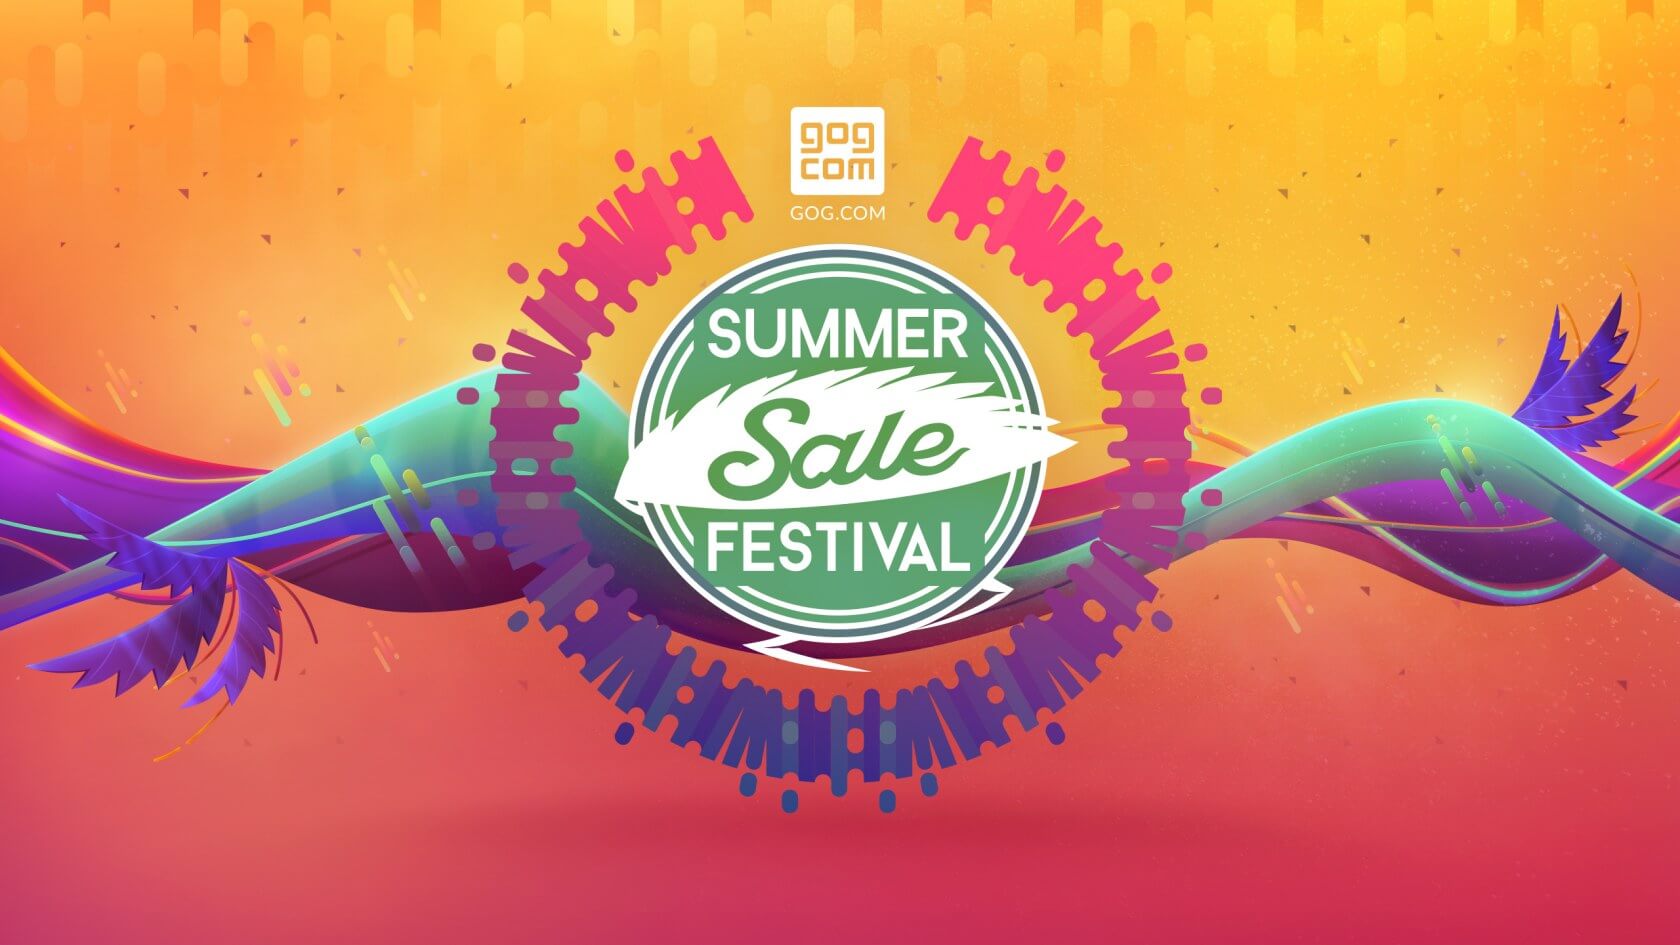 GOG kicks off its annual Summer Sale with a free game, deep discounts, and bundle deals